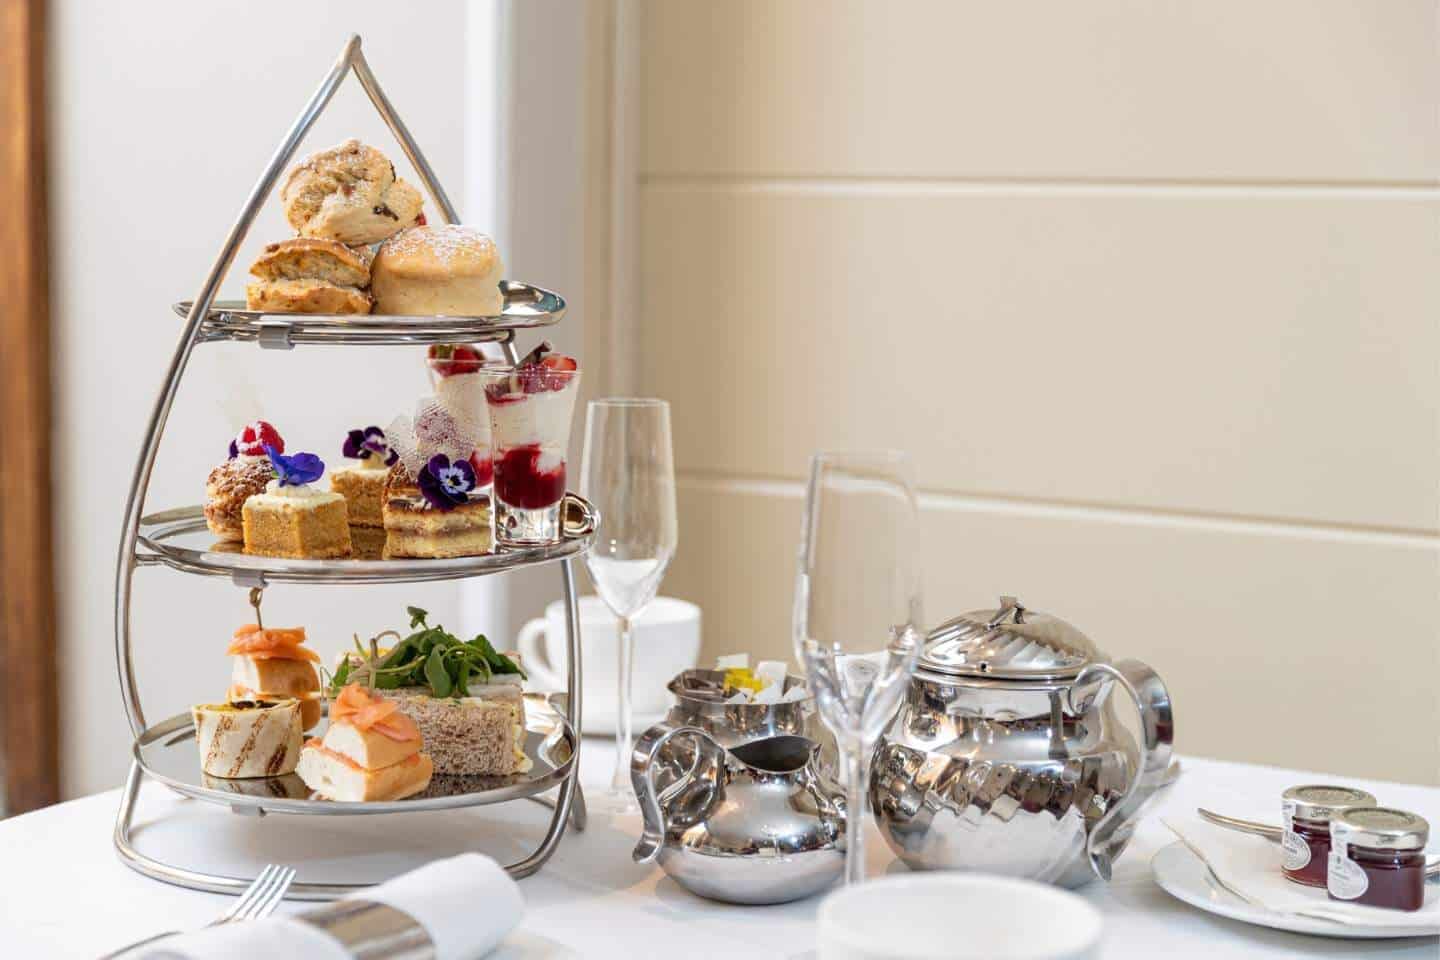 Afternoon tea at Cotswold House Hotel